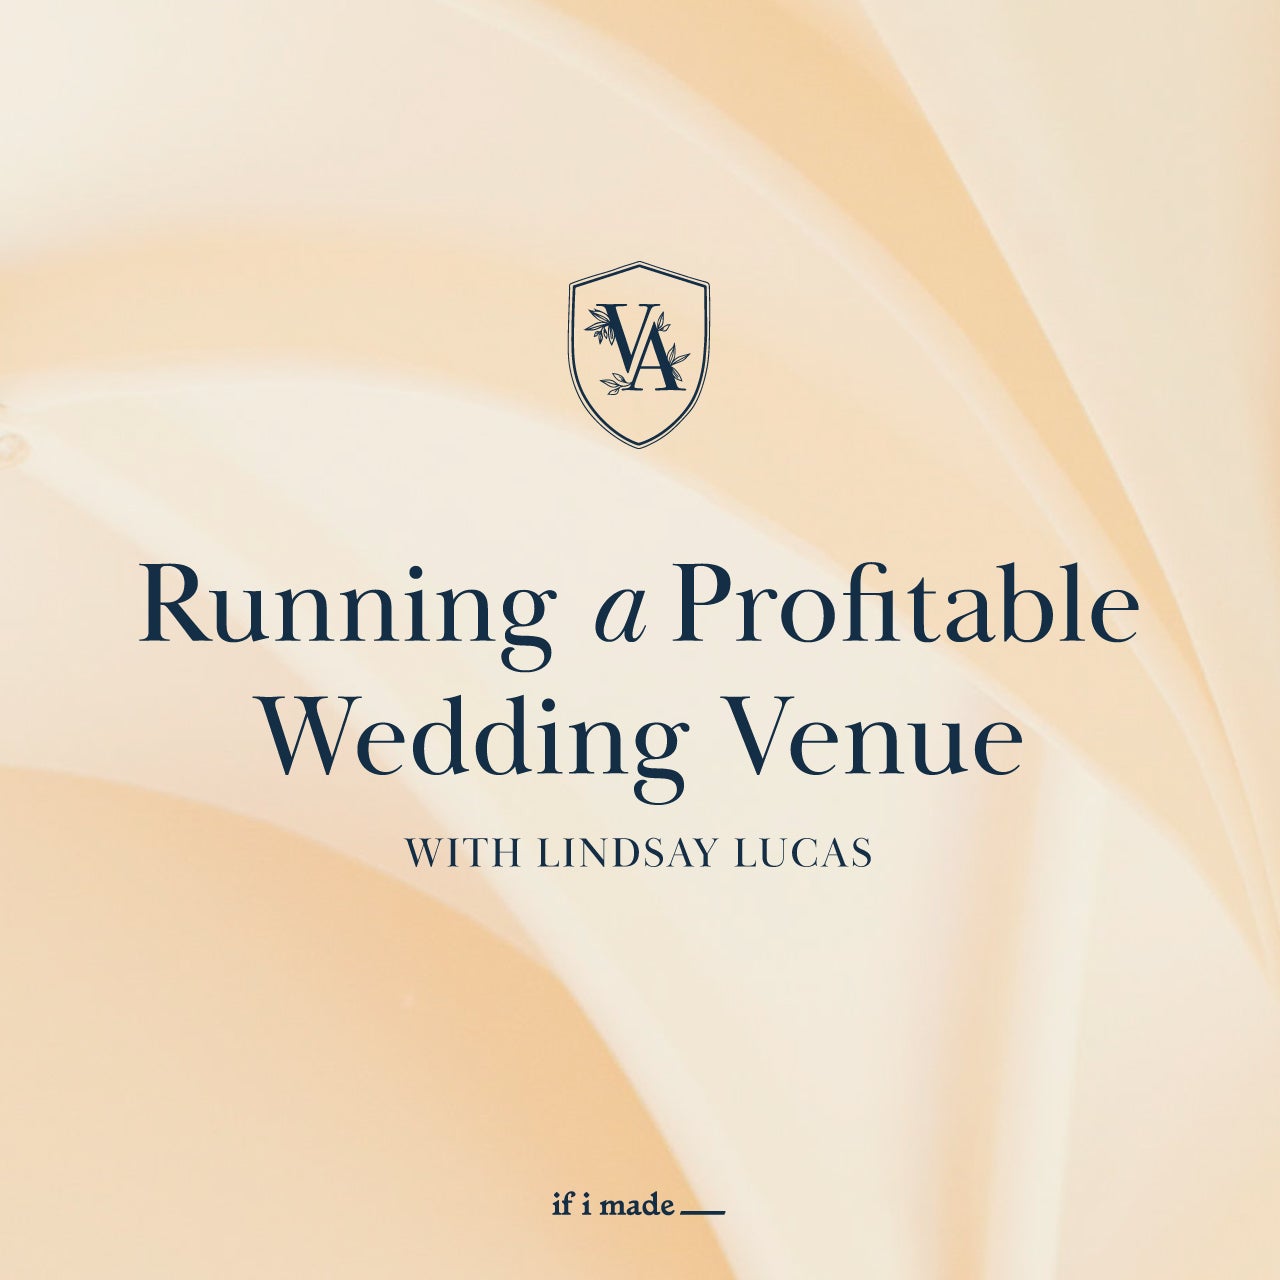 Running a Profitable Wedding Venue (SPP0122) - 14 payments of $149